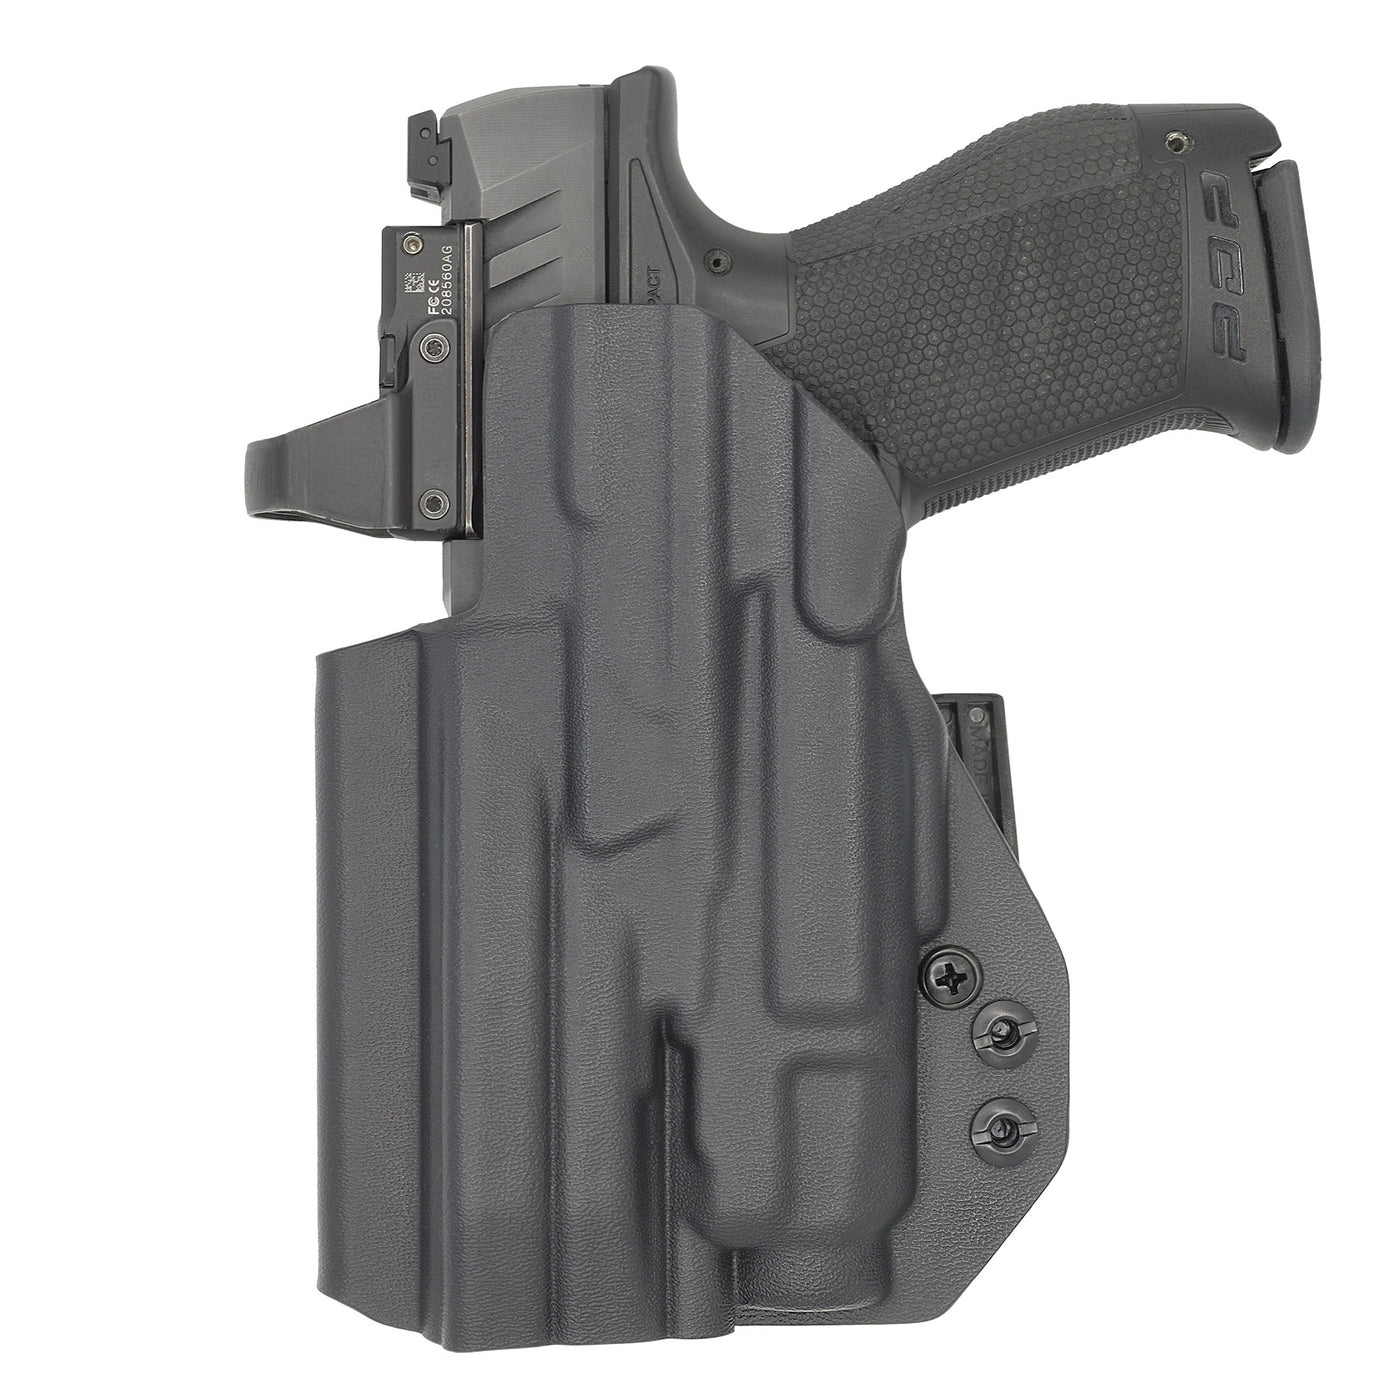 C&G Holsters Quickship IWB ALPHA UPGRADE Tactical Beretta M9A3 Streamlight TLR7/a in holstered position back view